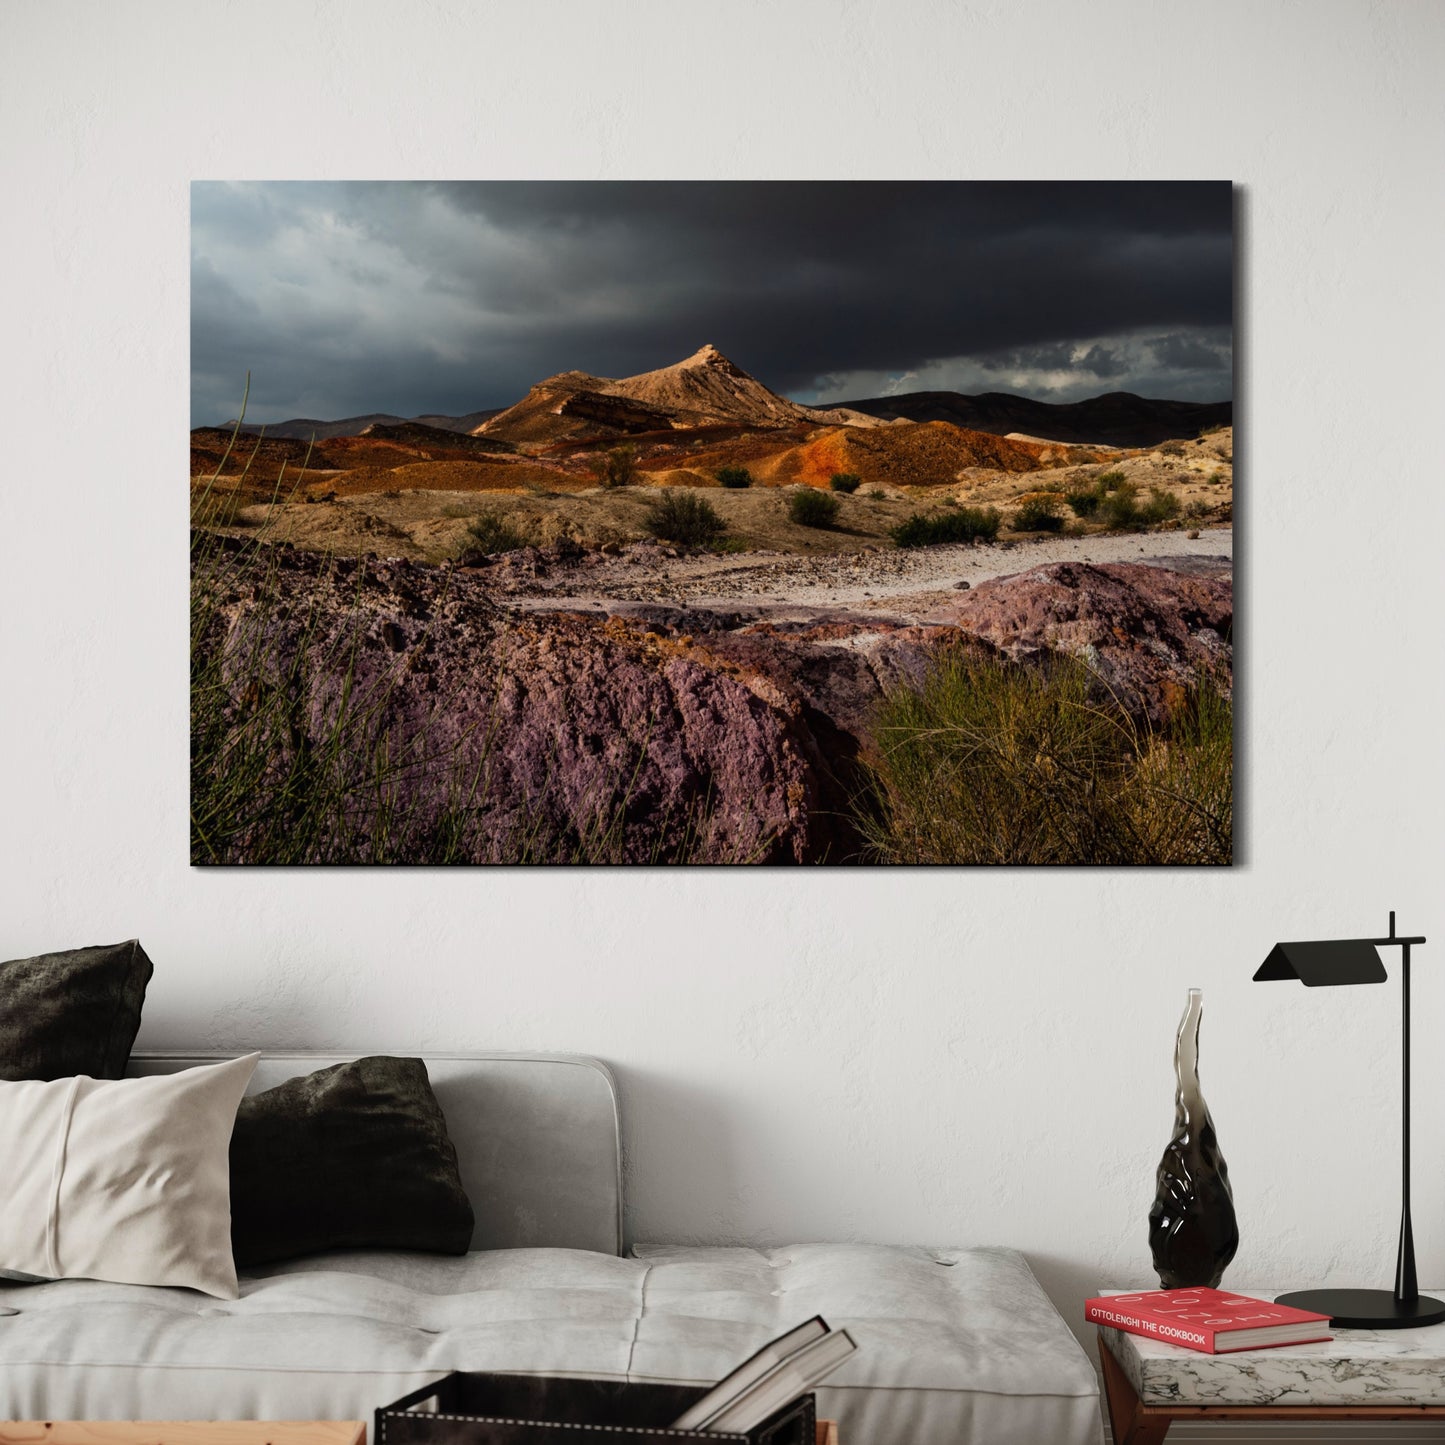 Desert Dreams by Yehoshua Halevi Photograph - Glossy Acrylic Print (French Cleat Hanging)